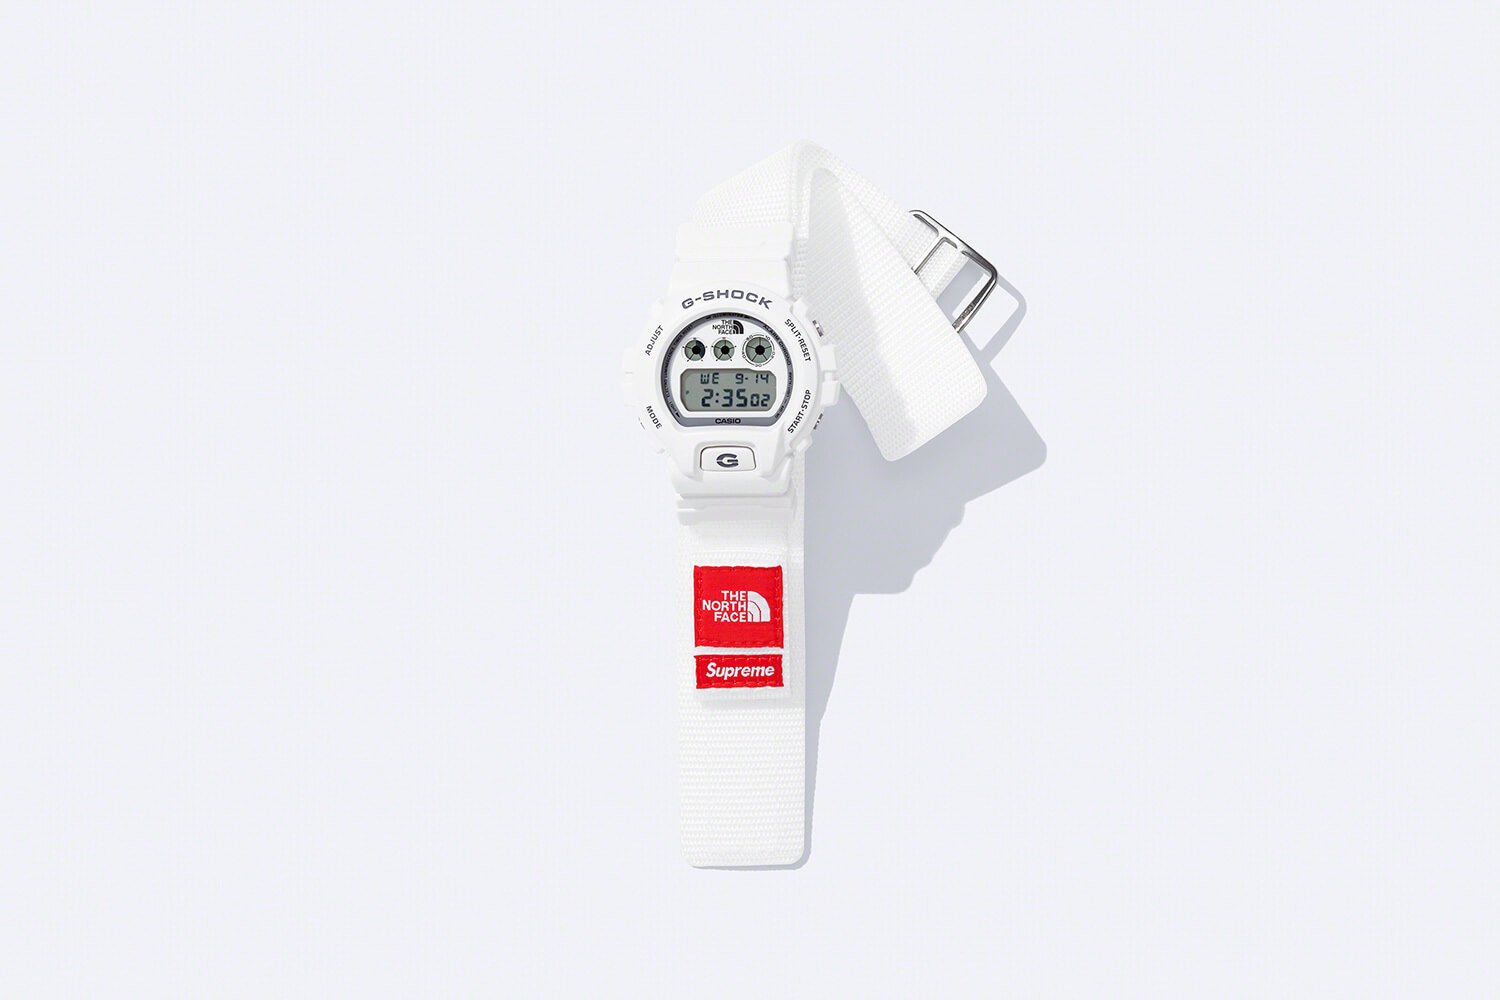 The Supreme x The North Face x G-Shock DW-6900 collaboration is 